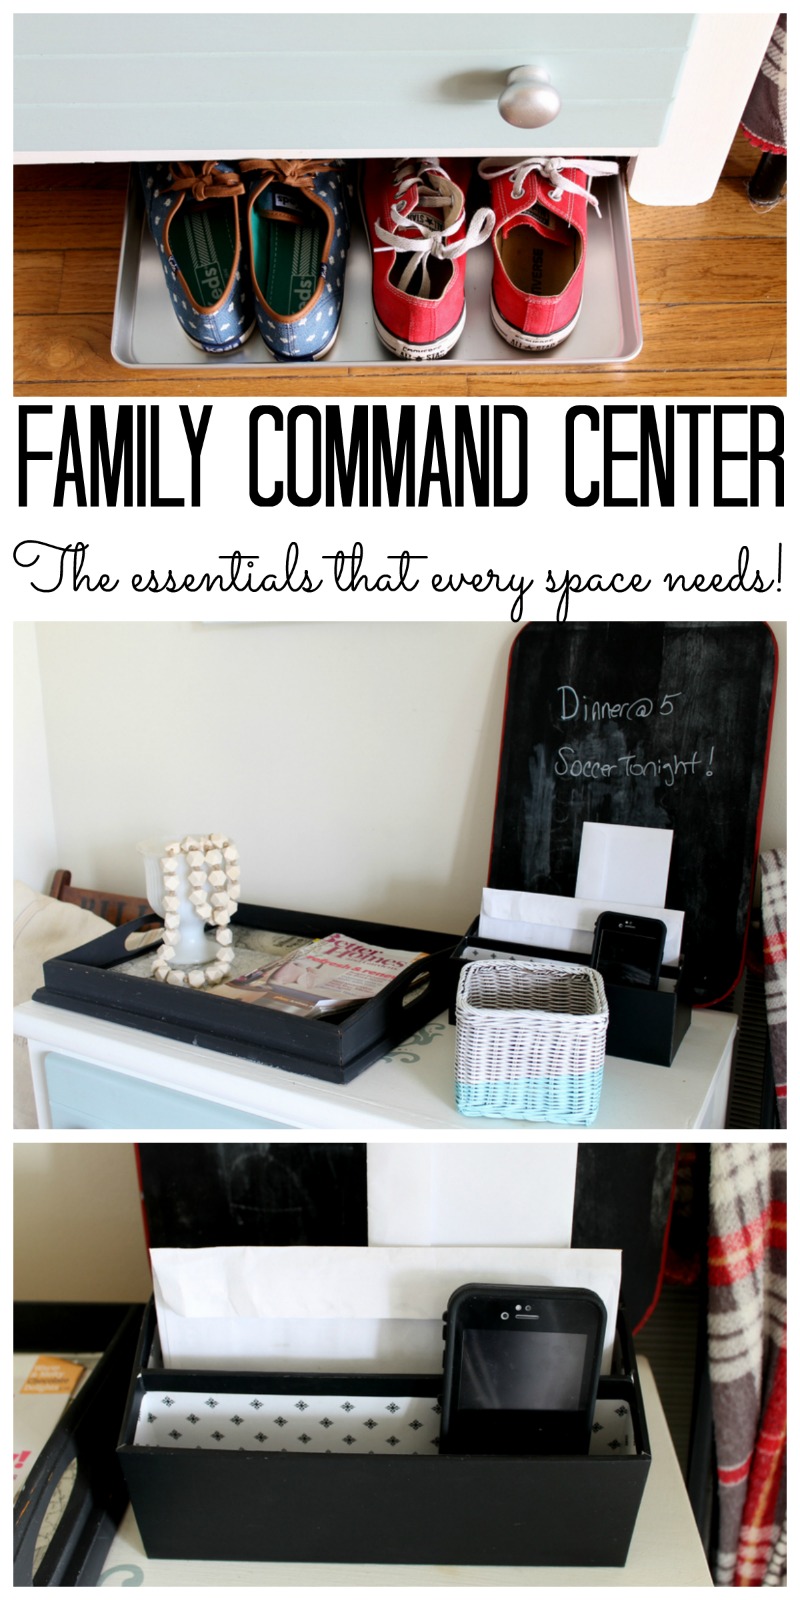 Family command center: Find out what your space needs and how to get organized!